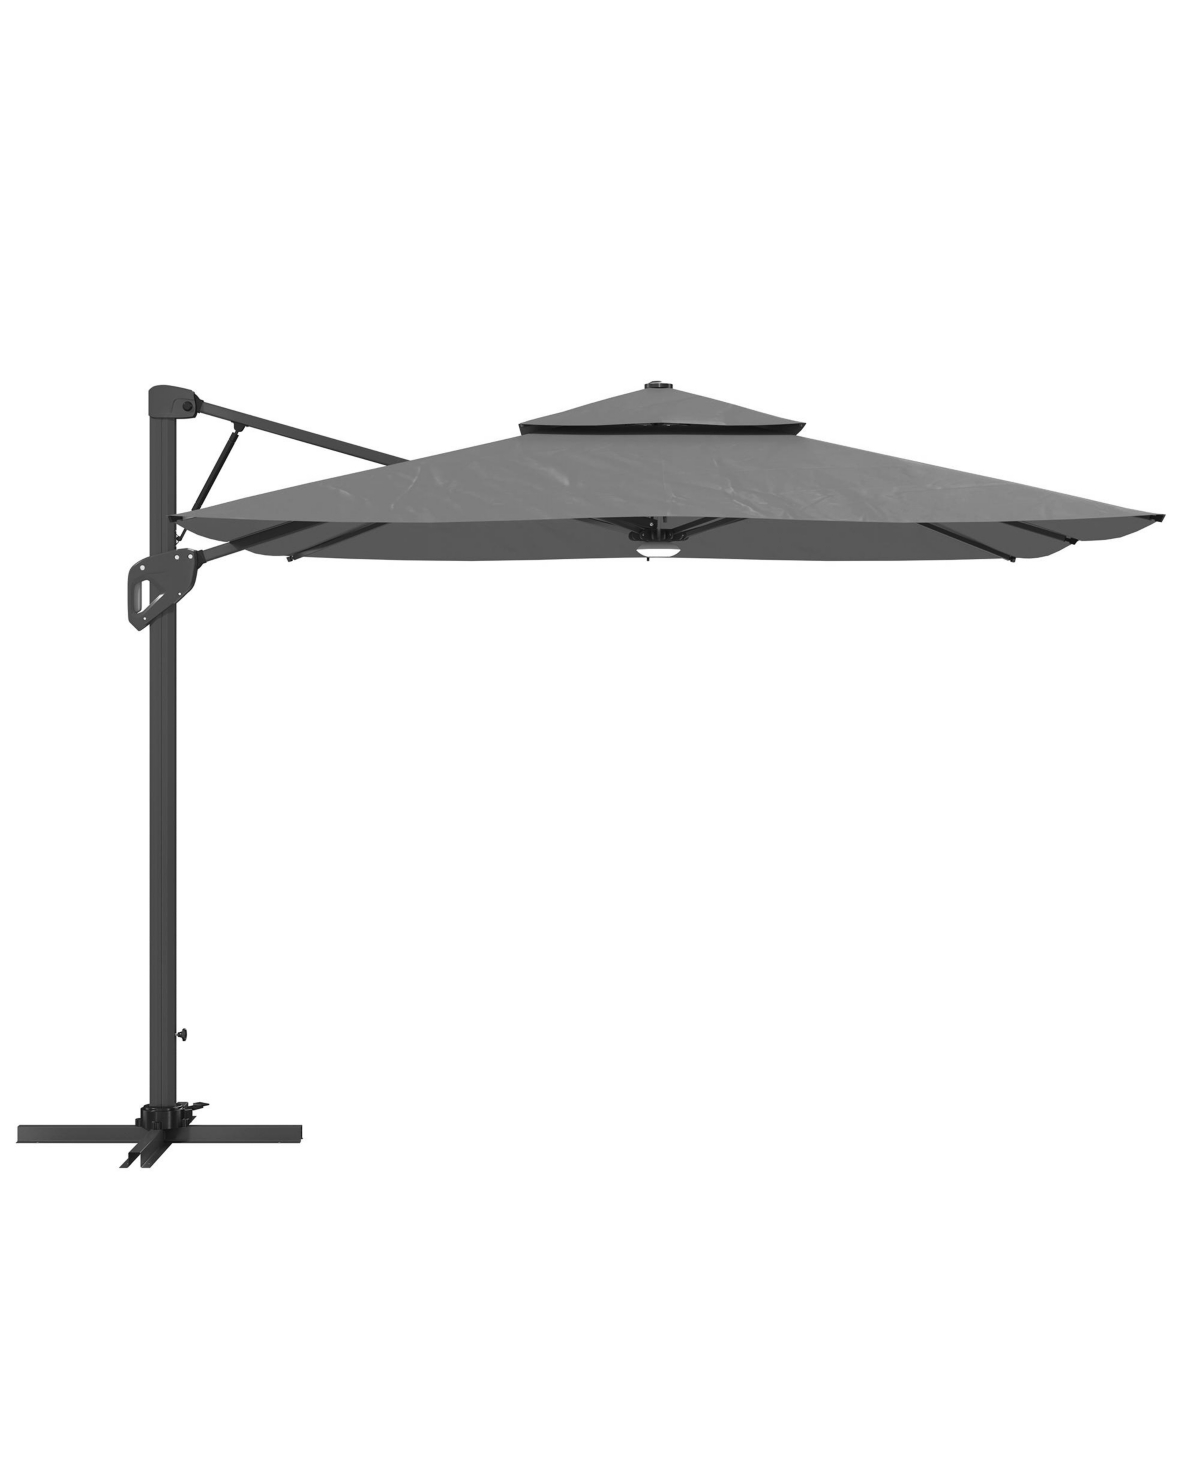 10ft Square Solar Led Offset Cantilever Outdoor Patio Umbrella with Built-in Bluetooth Speaker - Dark gray